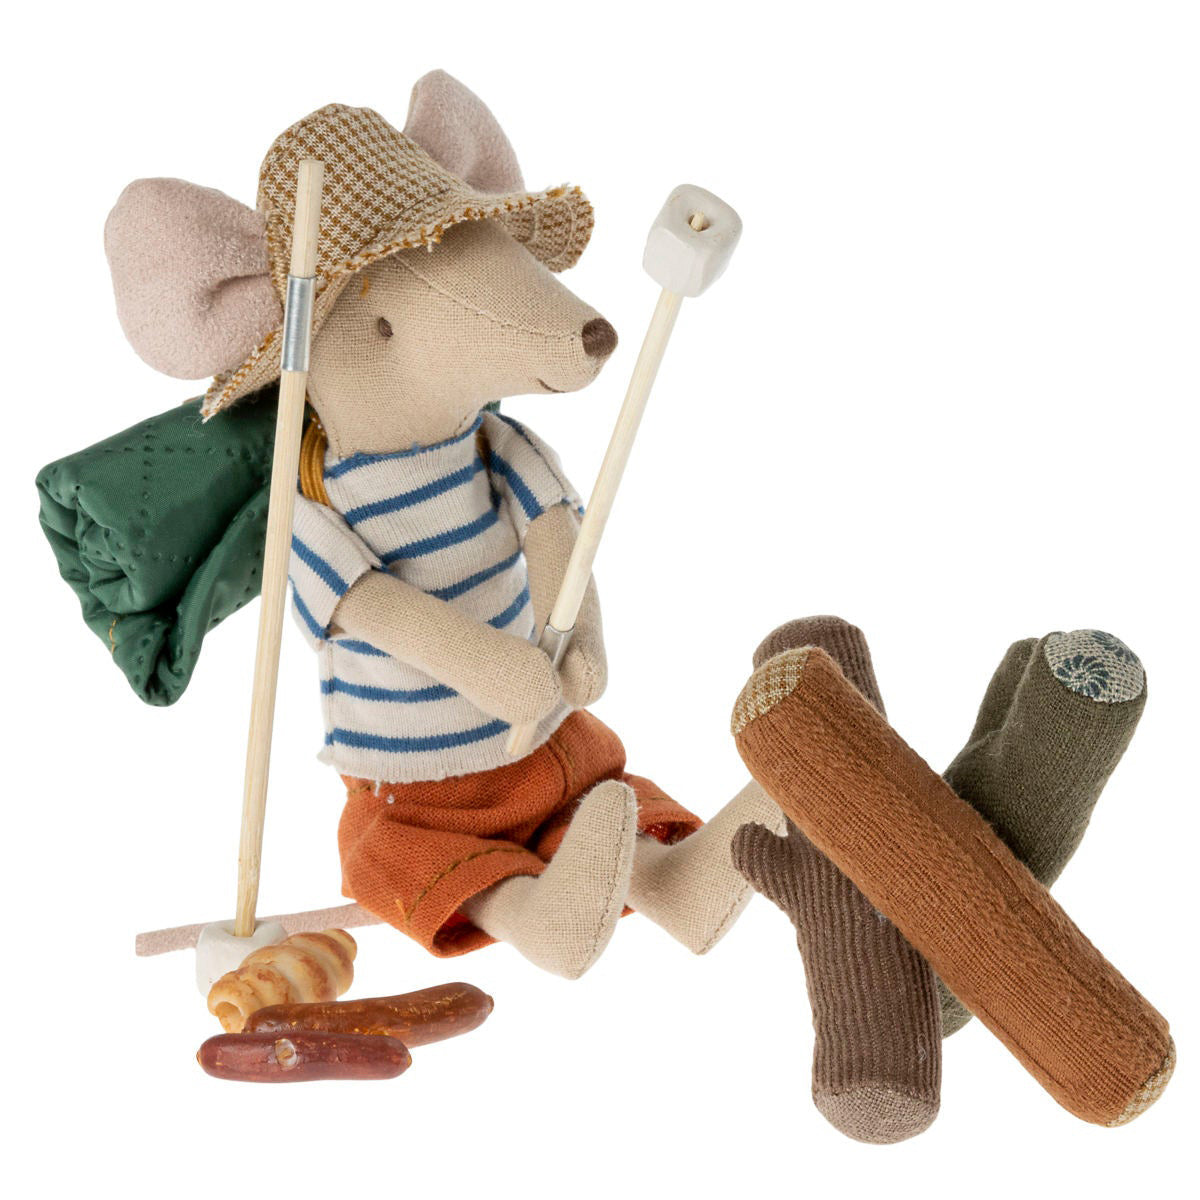 maileg fabric camping bonfire set with big brother mouse soft toy toasting marshmallows